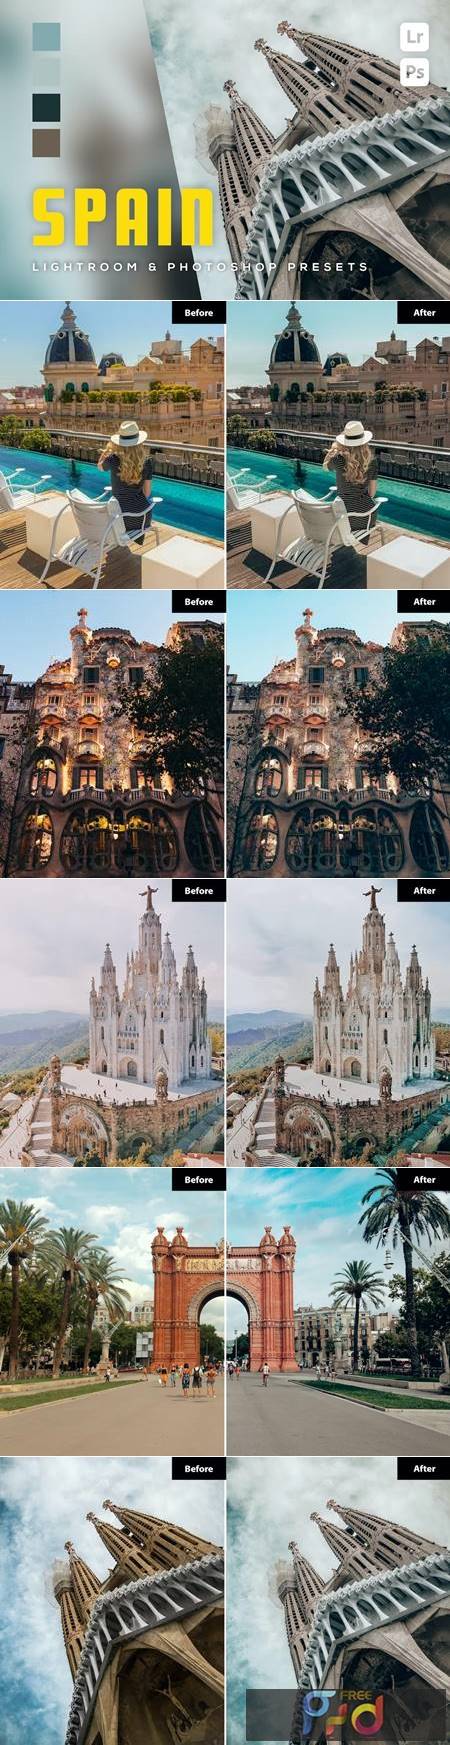 5 Spain Lightroom and Photoshop Presets CUBMLTW 1